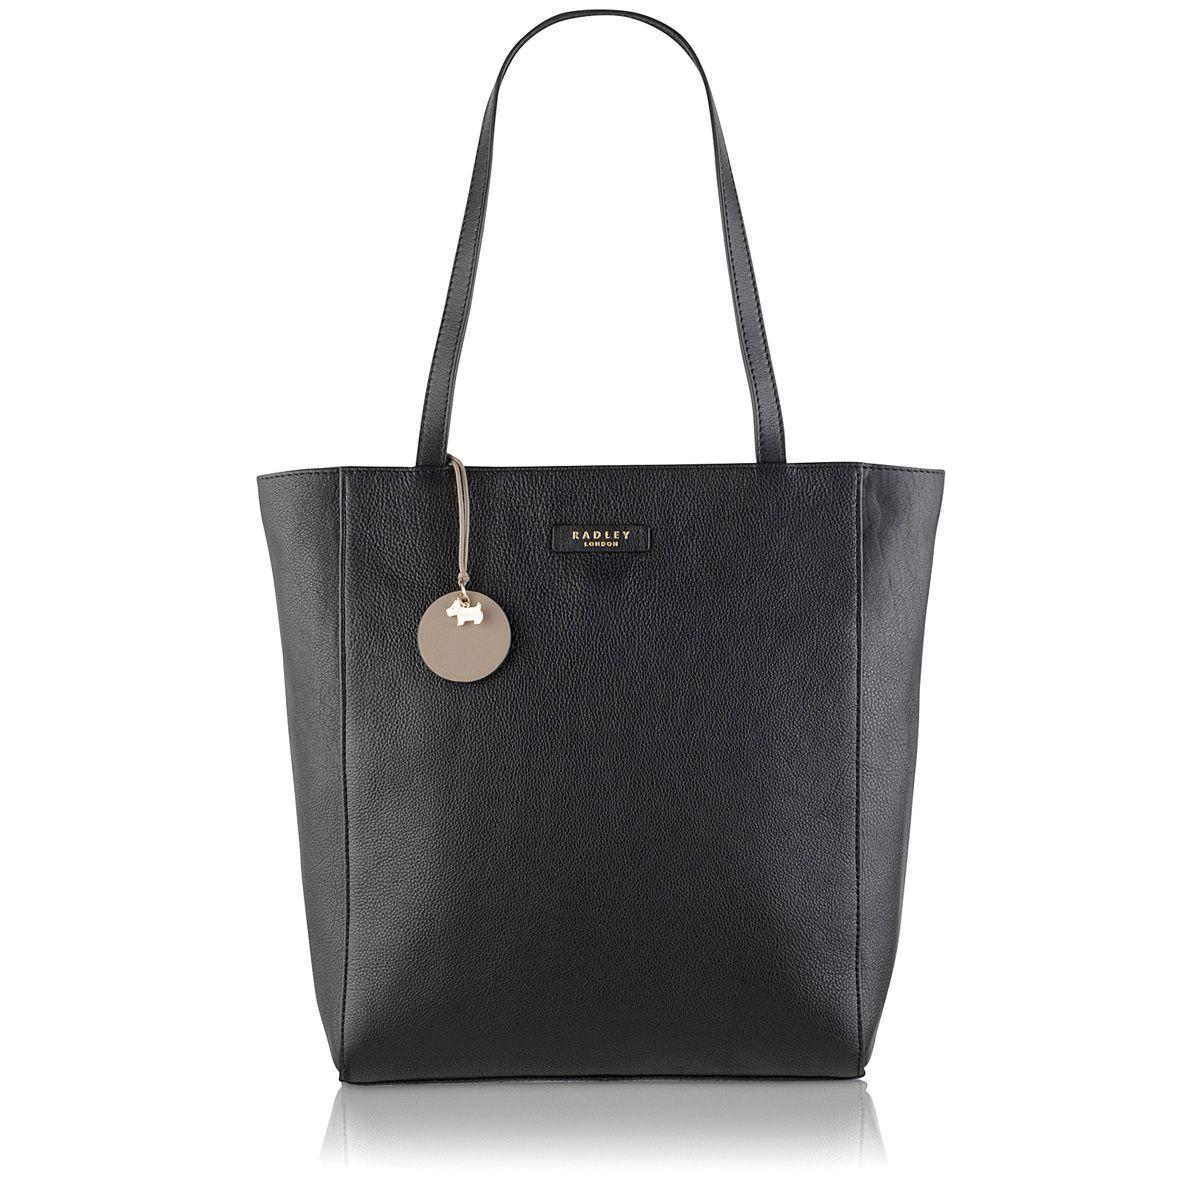 Bags On Sale: Chloe Bags On Sale House Of Fraser